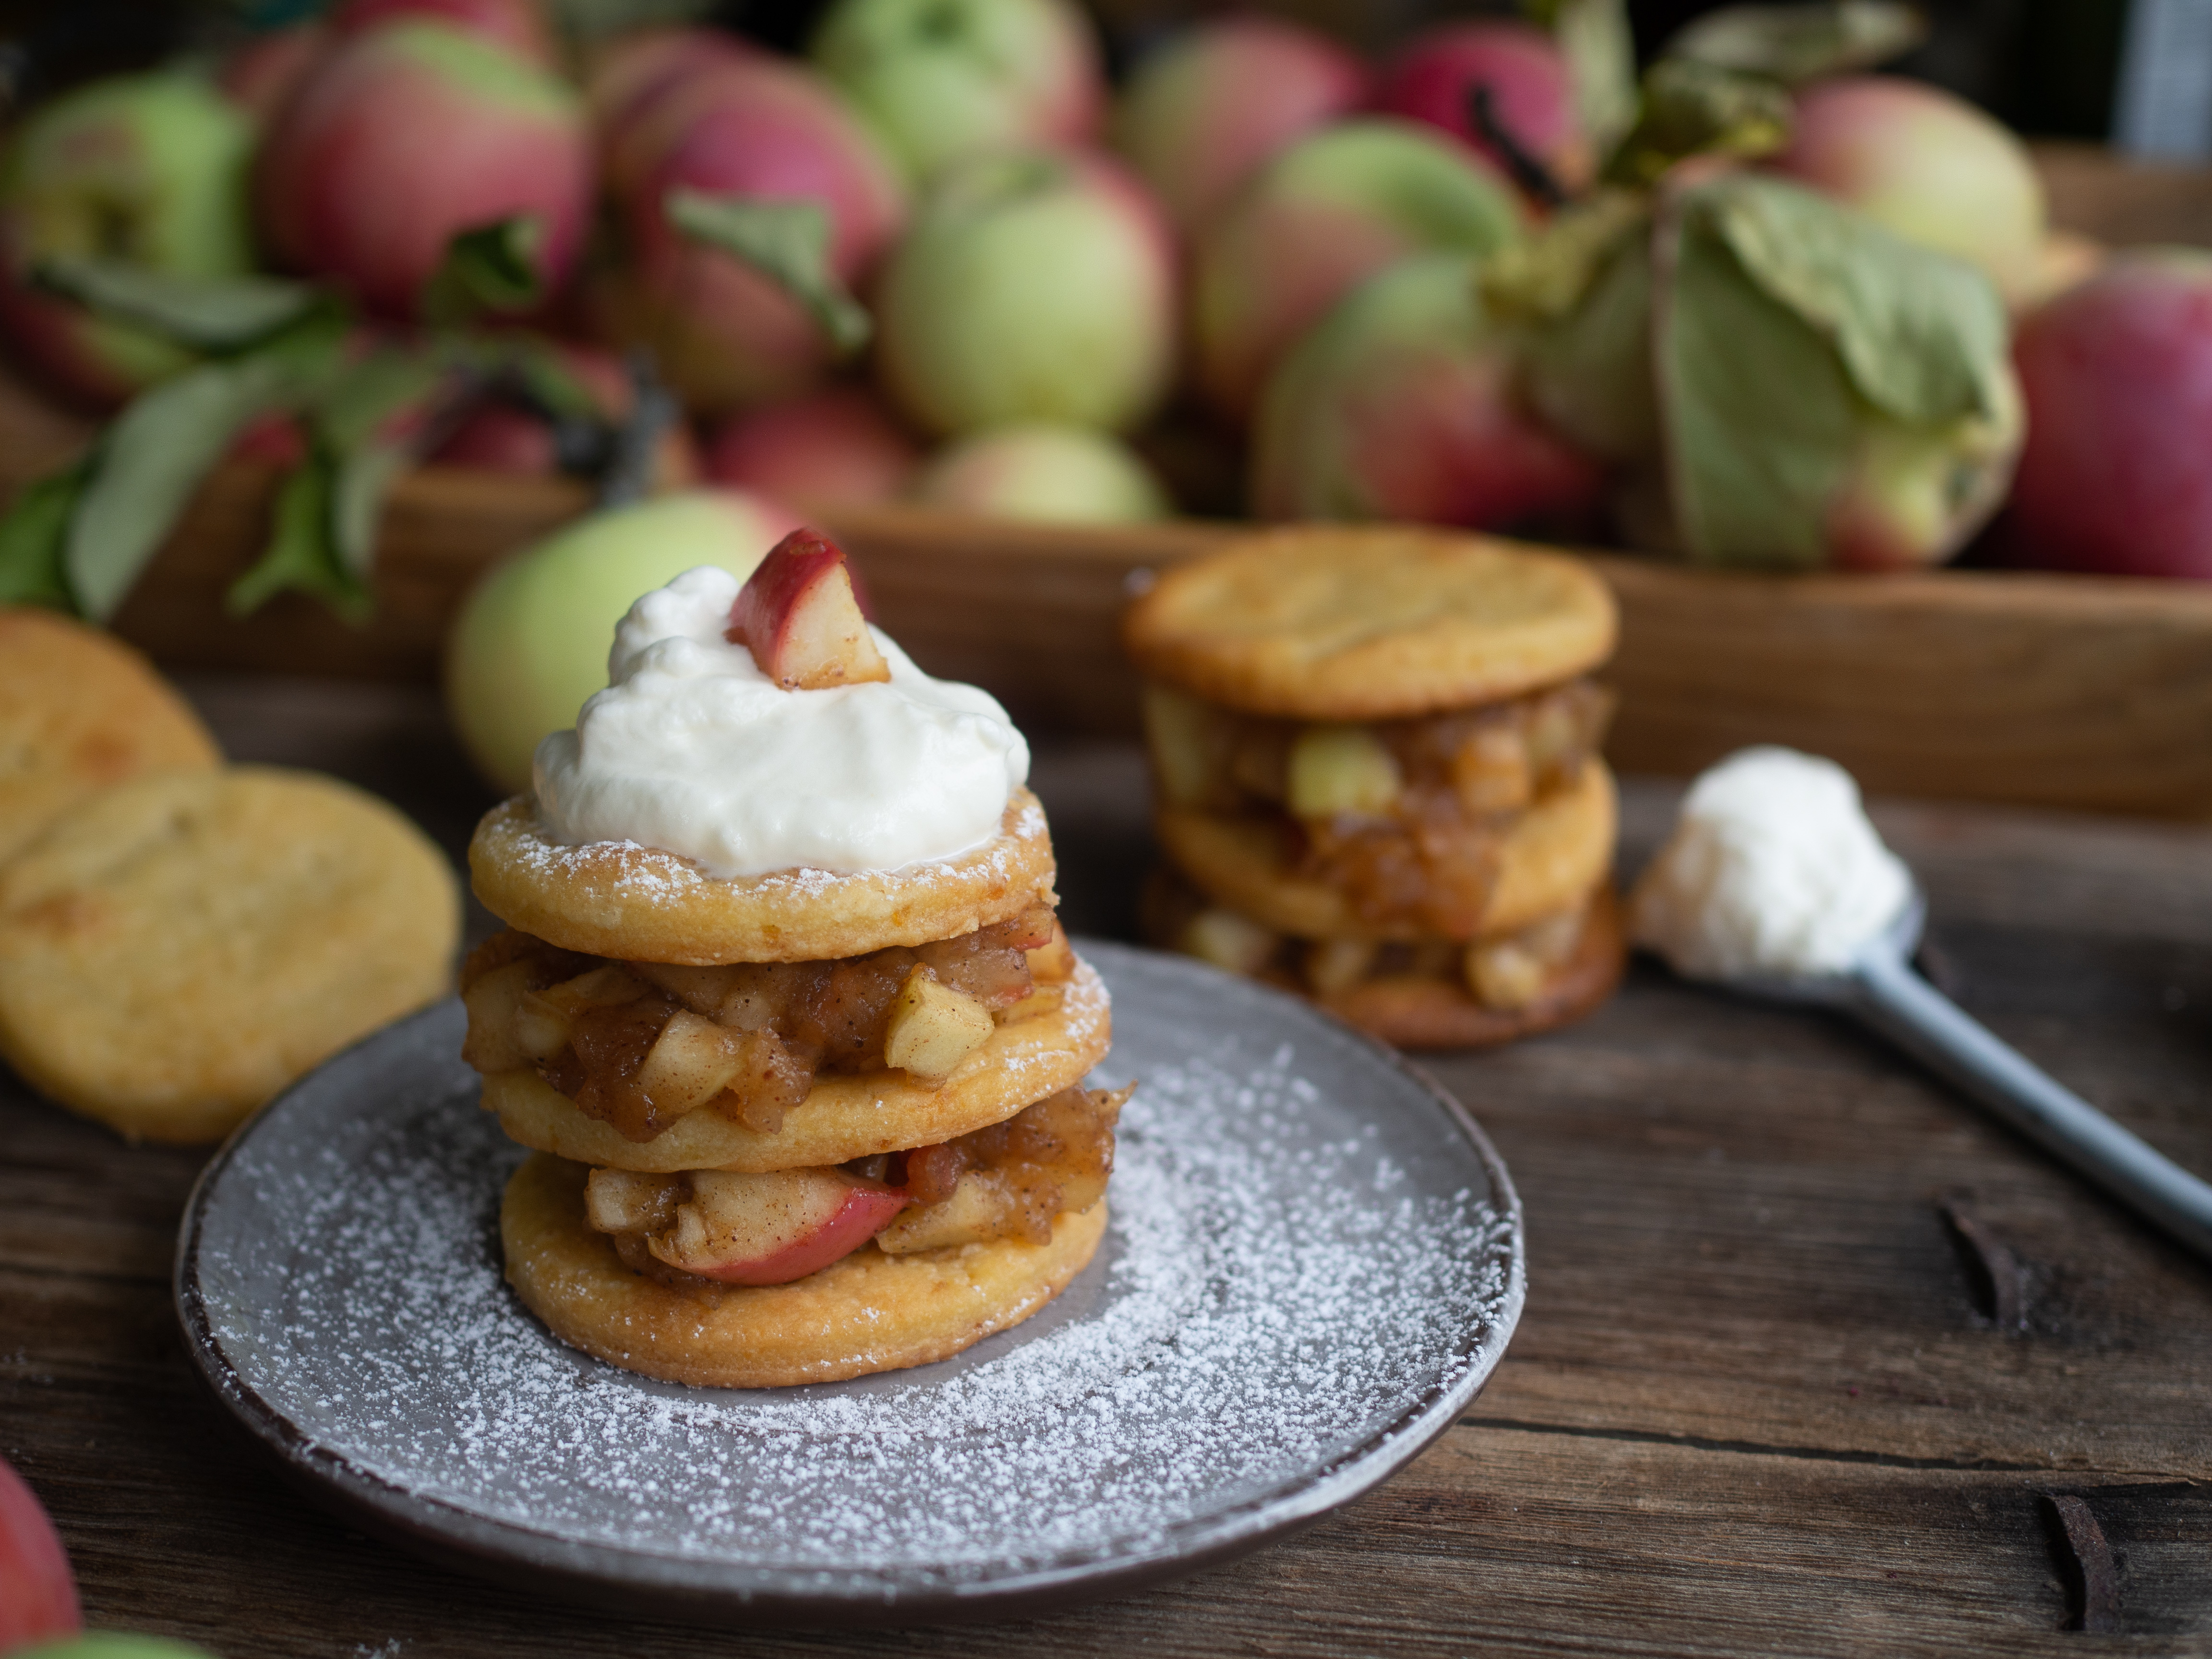 Potato Tarts with Spiced Stewed Apples (potet-terte)